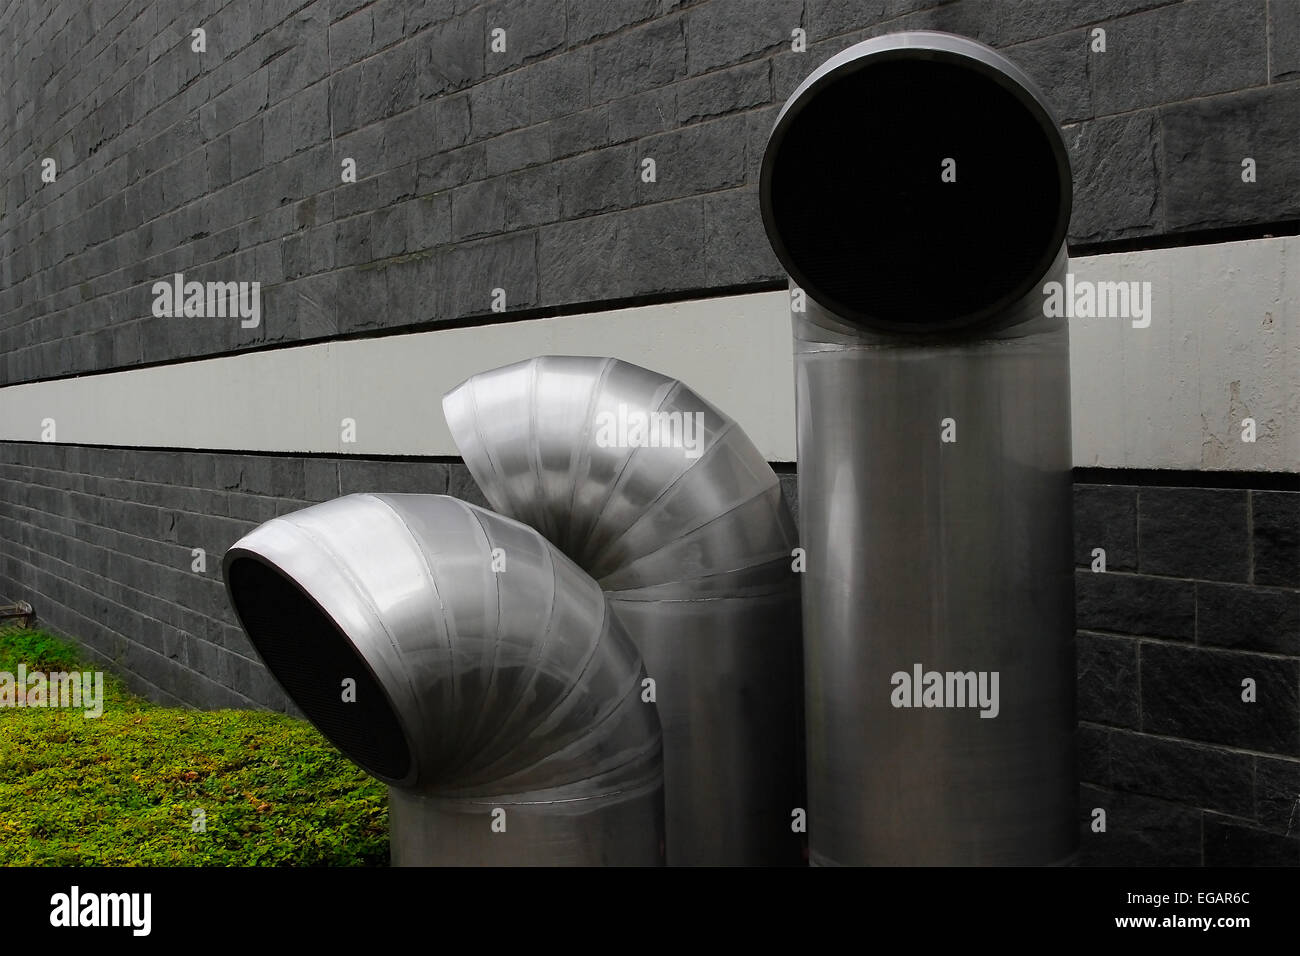 Ventilation pipes / ducts outside a swimming pool building Stock Photo